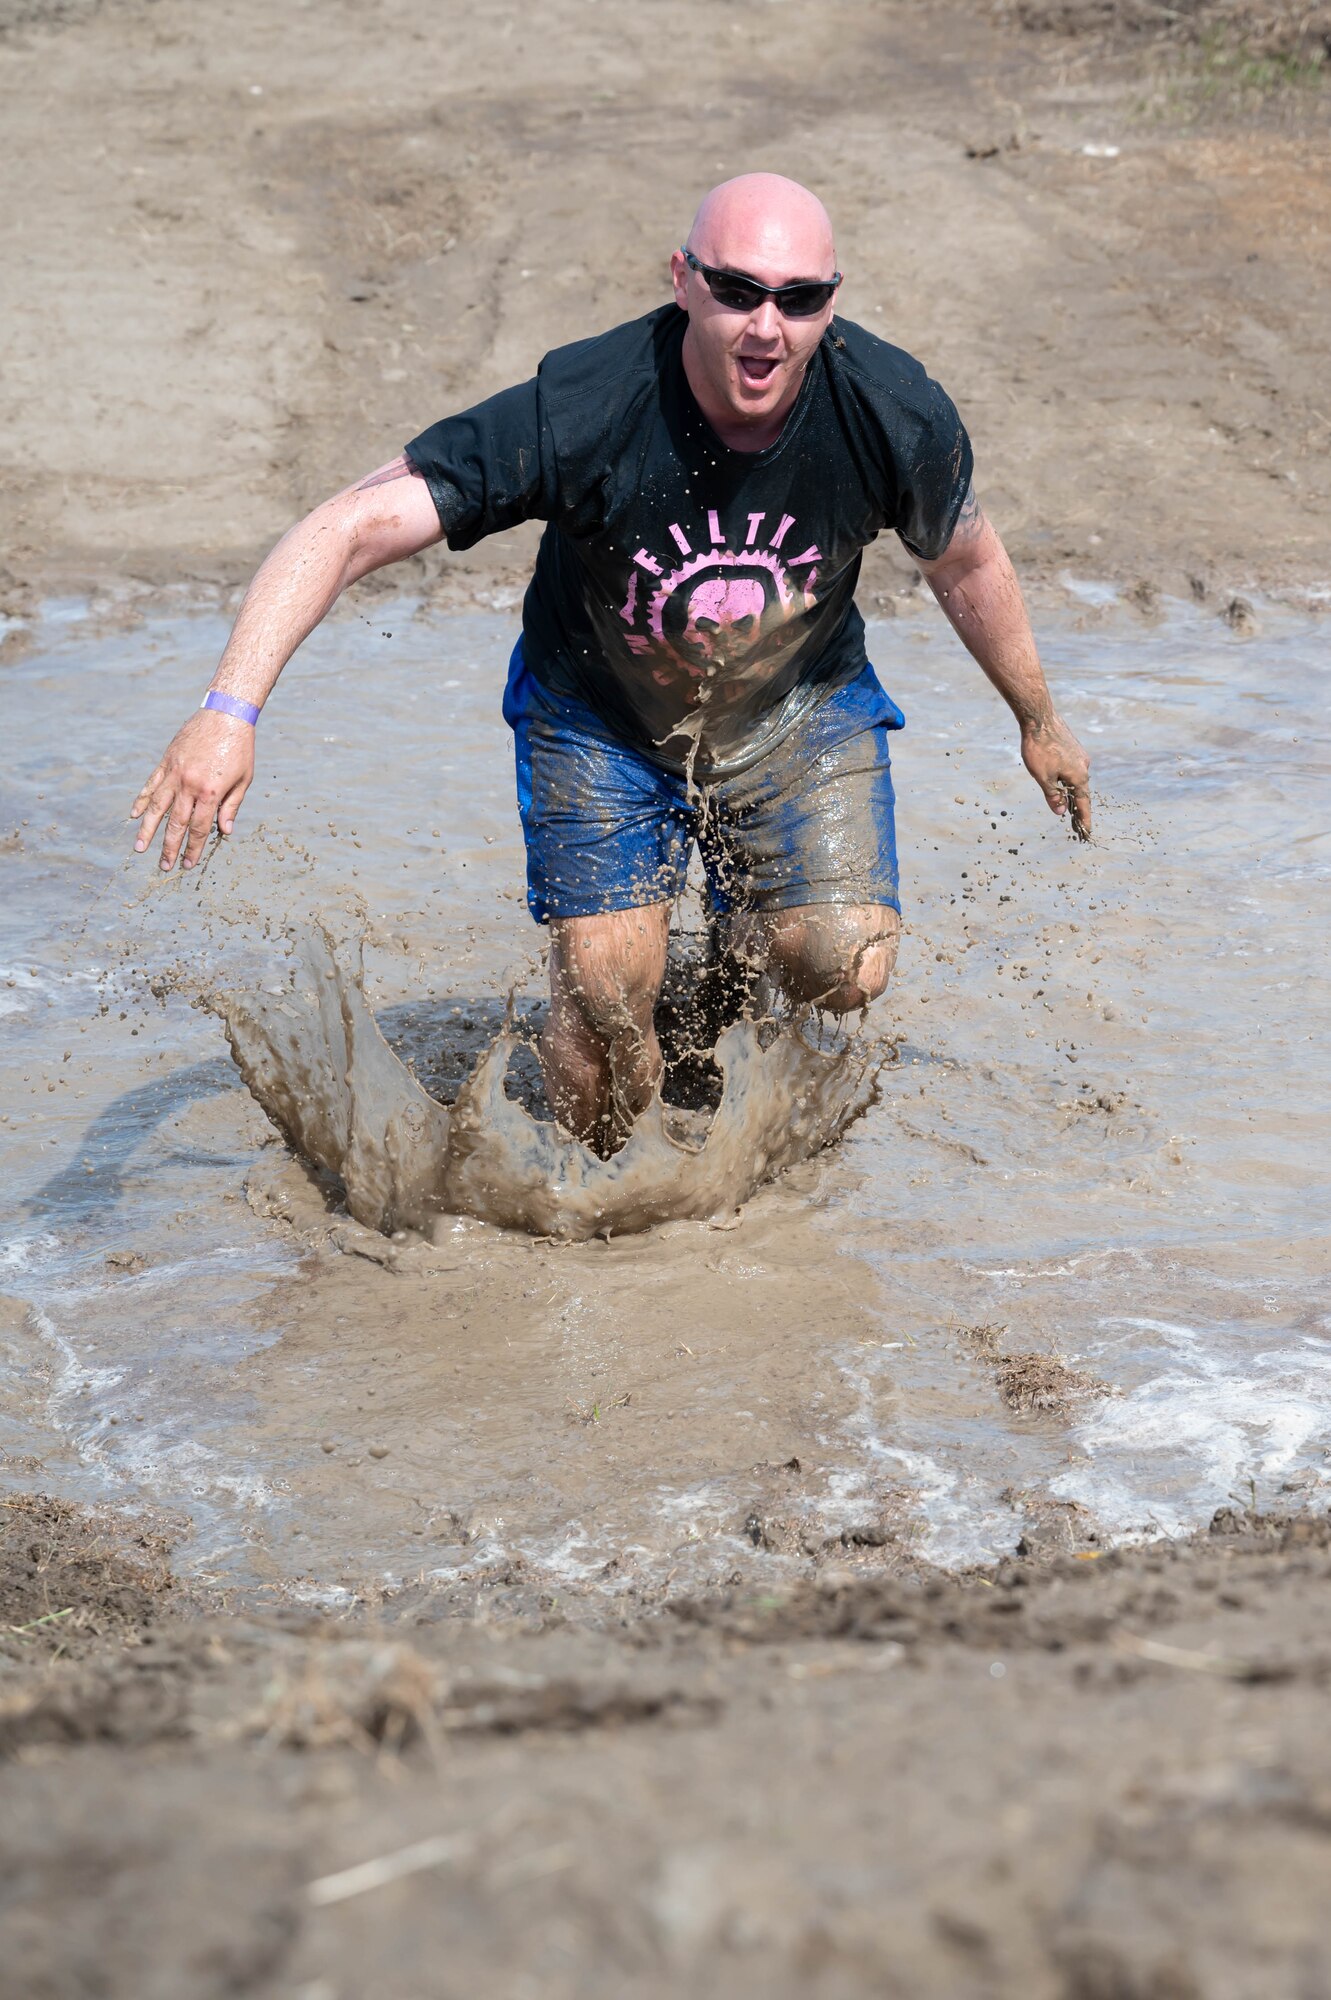 Staff Sgt. Justin Ferguson, 741st Maintenance Squadron maintainer, runs through a water obstacle during the Filthy Mudder race June 25, 2021, at Malmstrom Air Force Base, Mont.